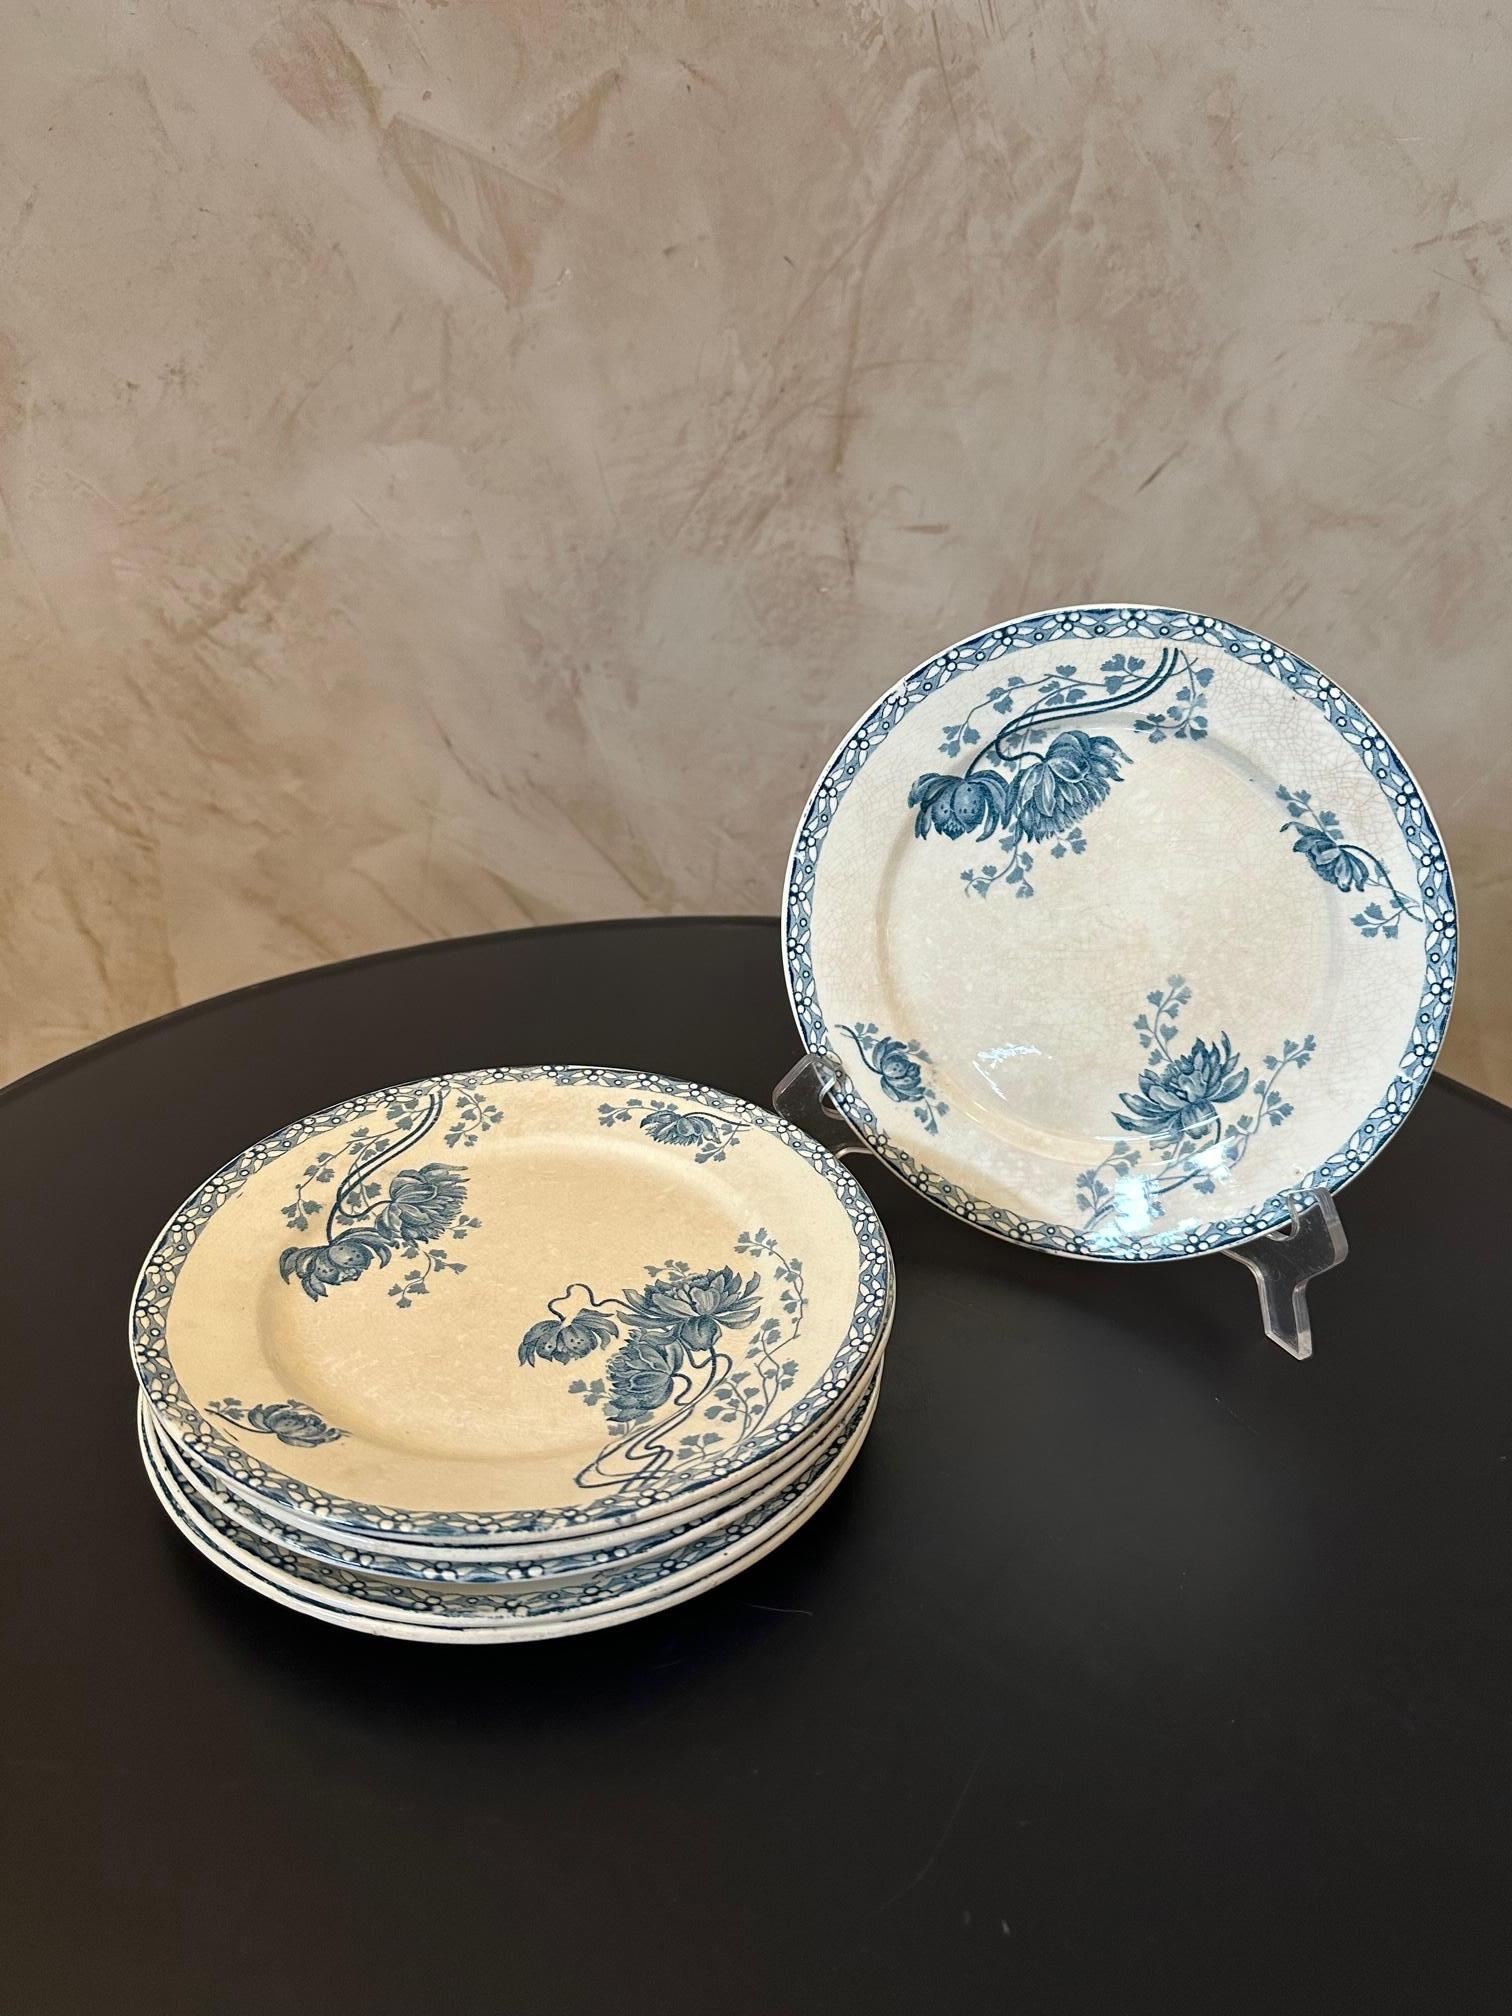 Set of 6 Sarreguemines earthenware dessert plates dating from the 1920s. 